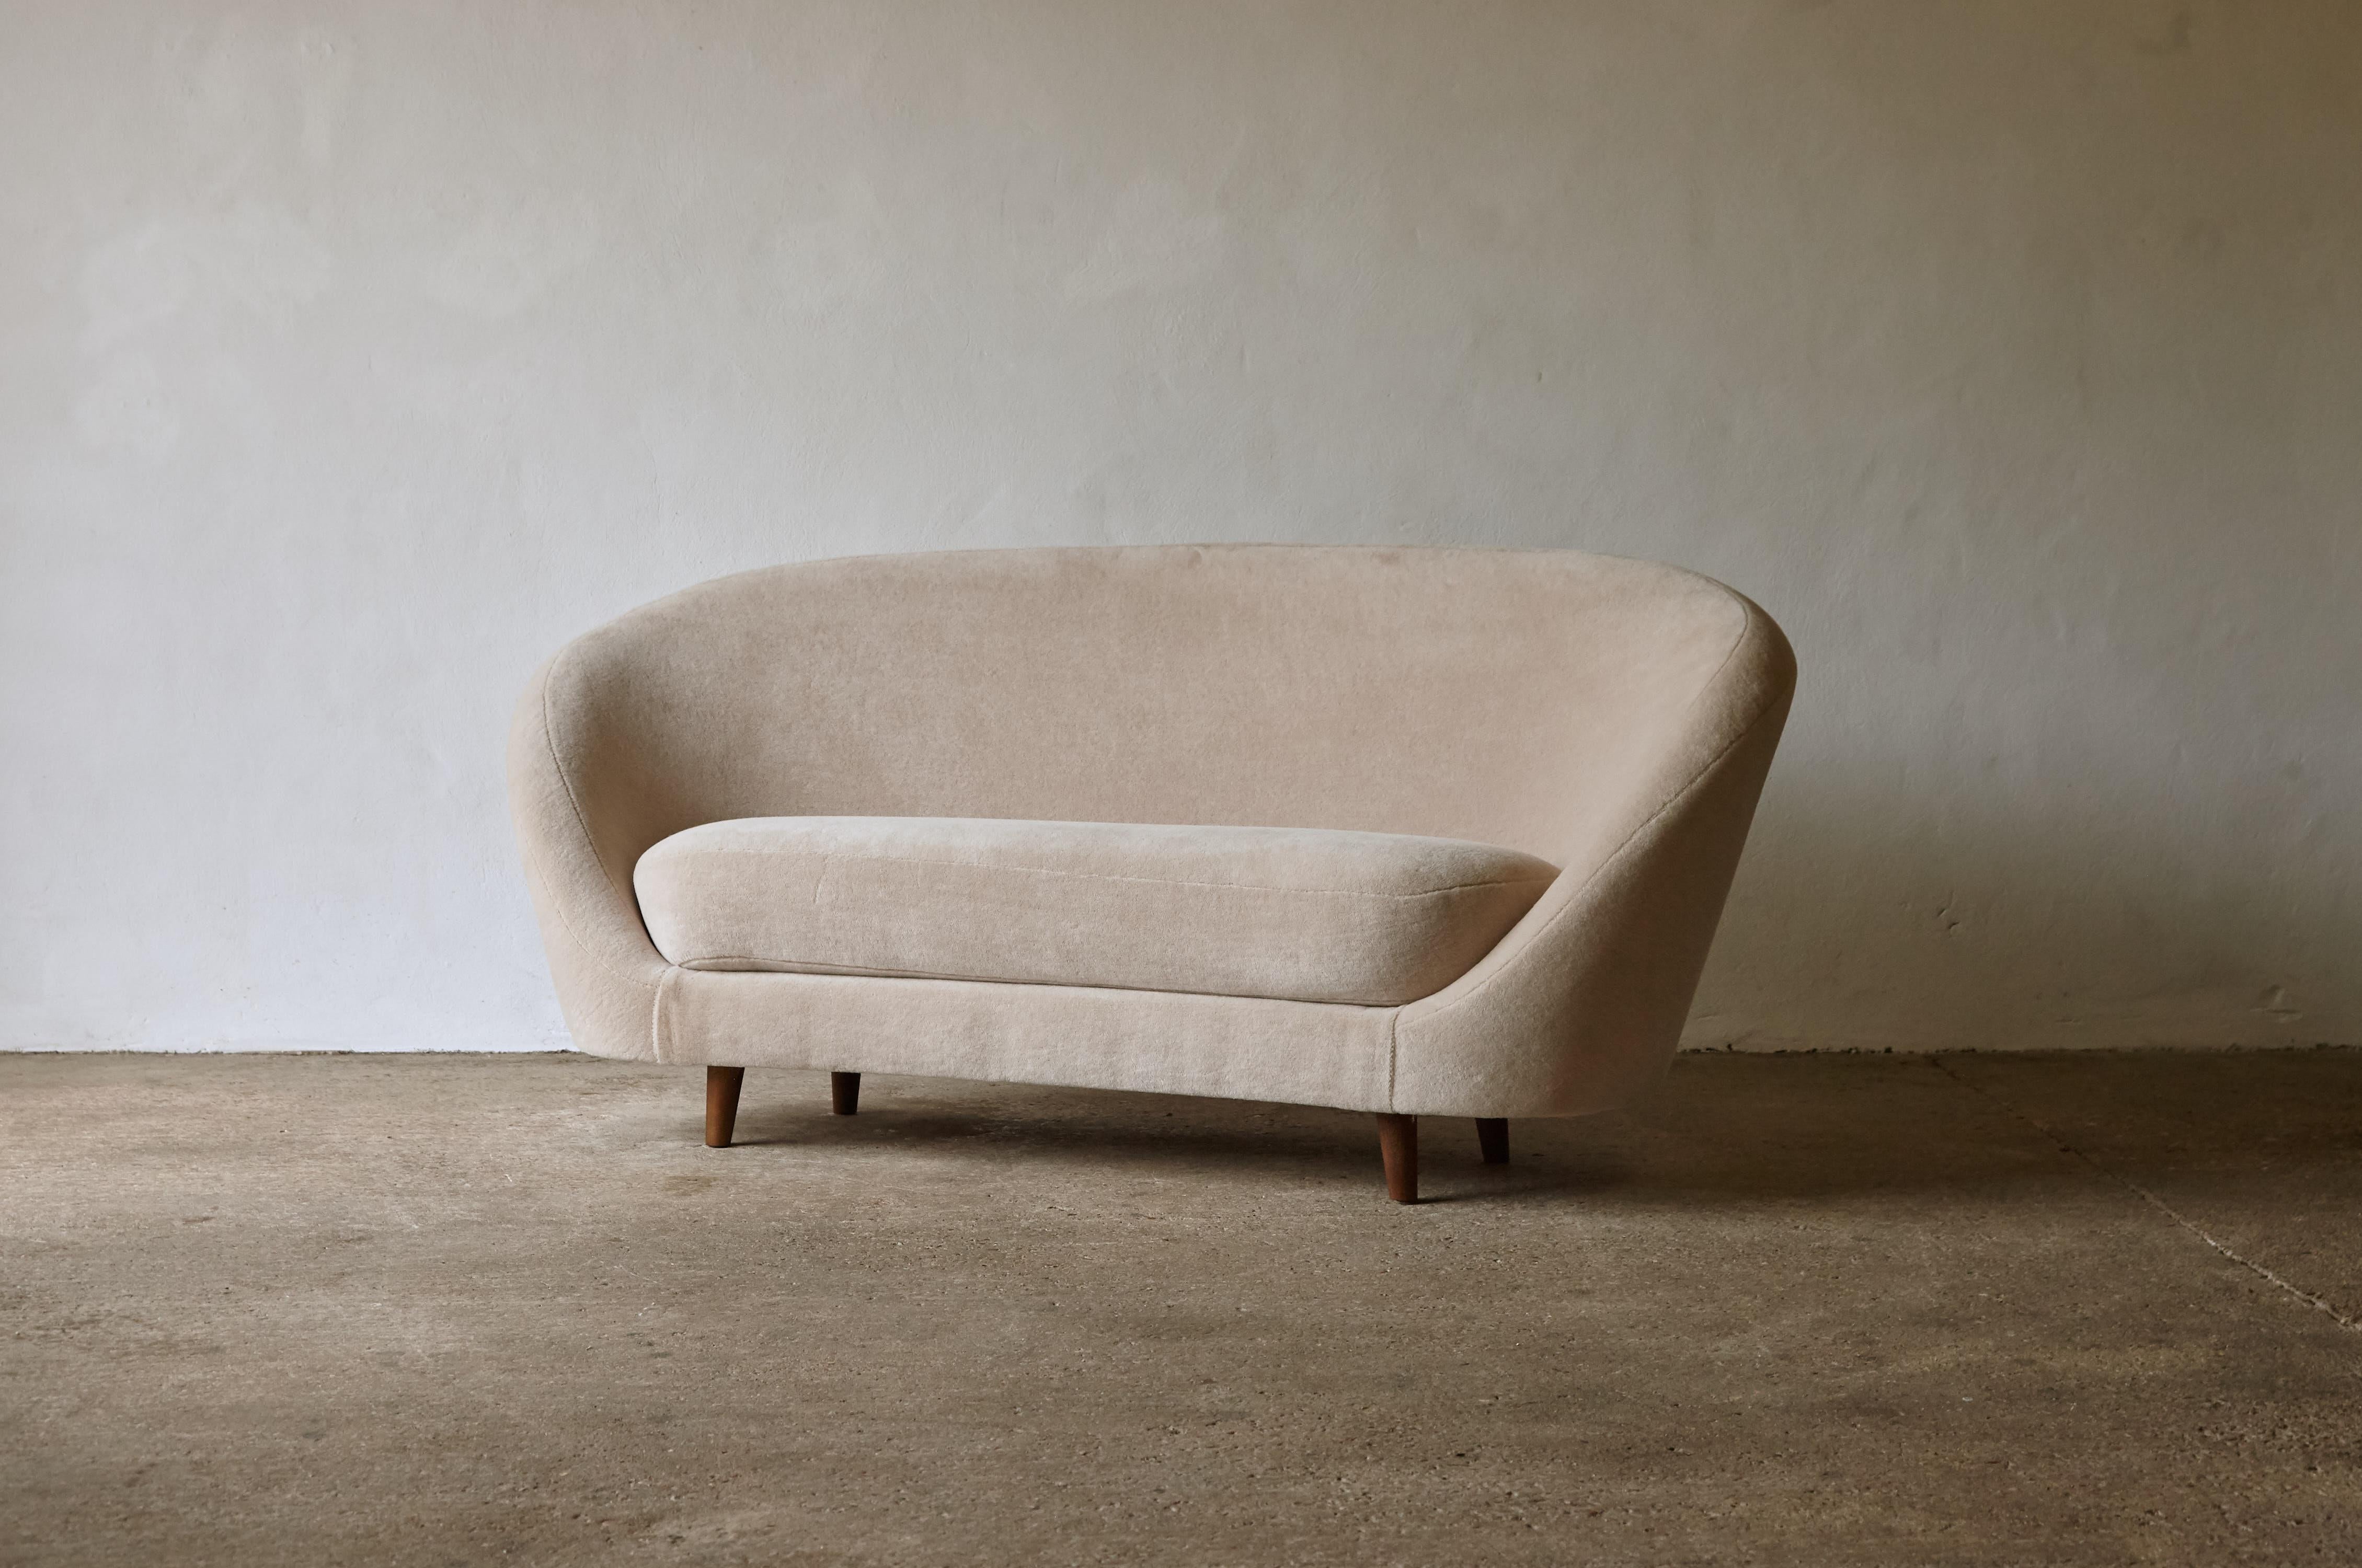 Italian Curved Egg Shape Sofa, in the Style of Ico Parisi, Italy, 1950s / 60s For Sale